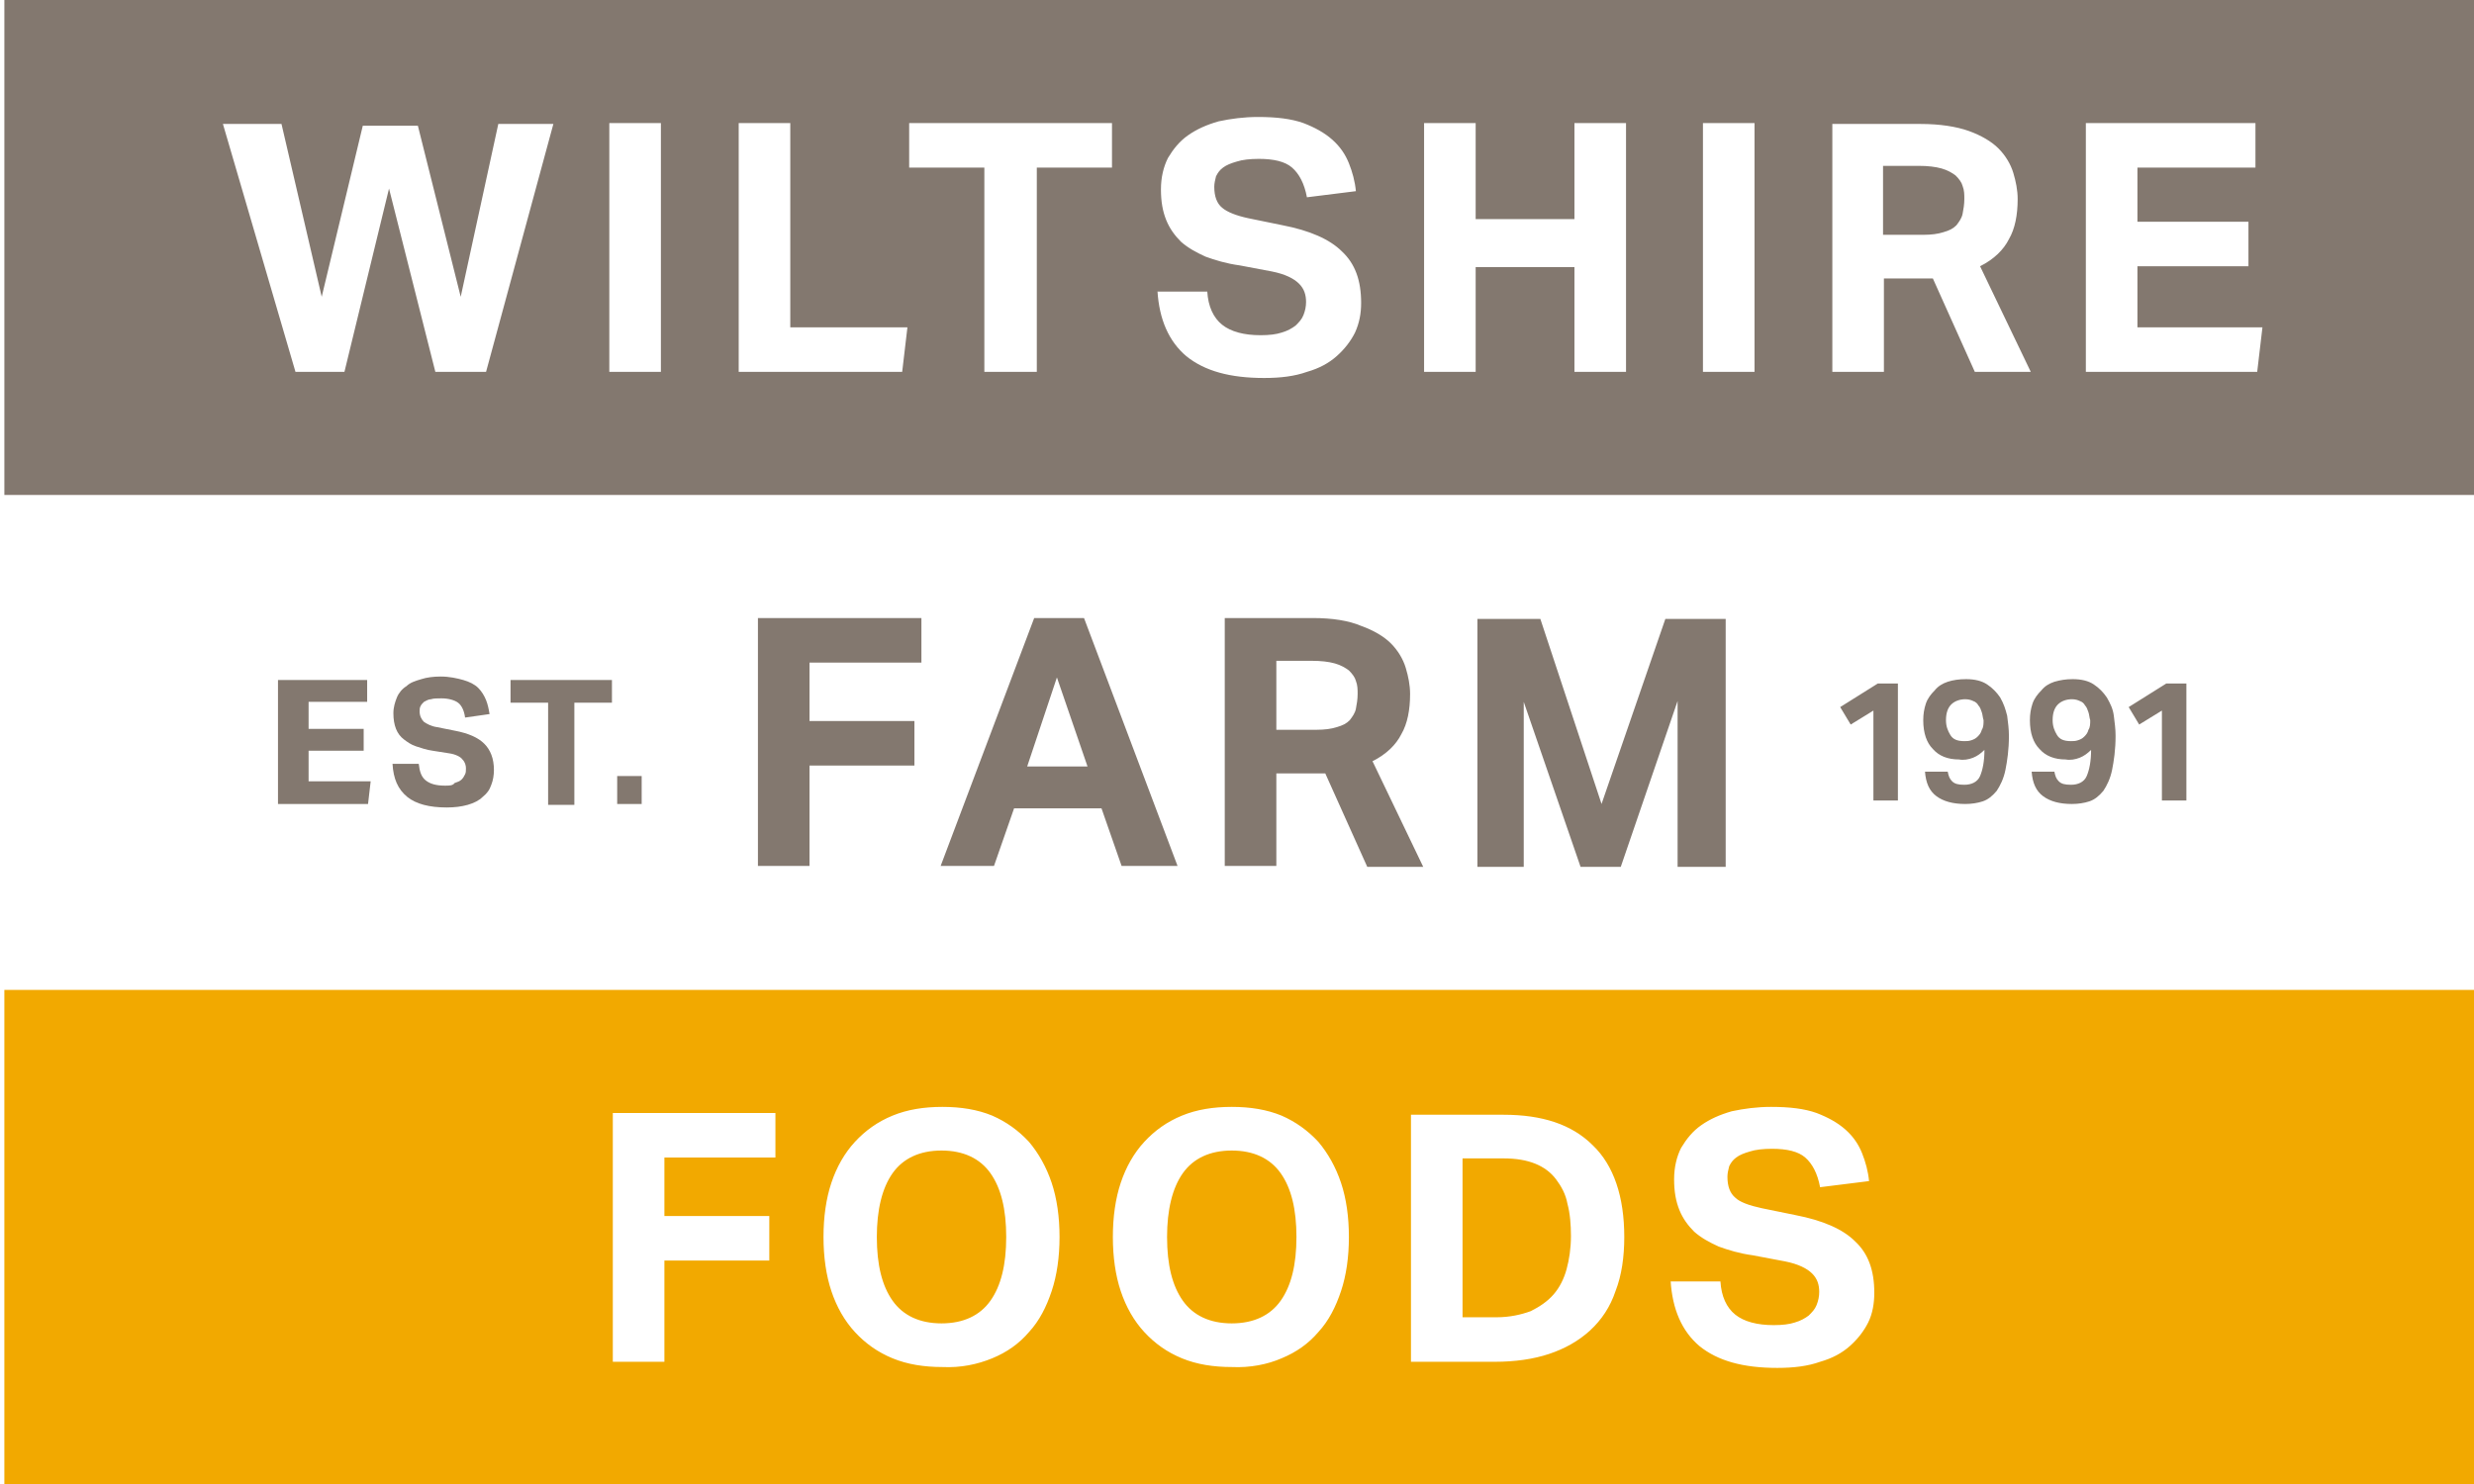 Wiltshire Farm Foods Coupons & Promo Codes